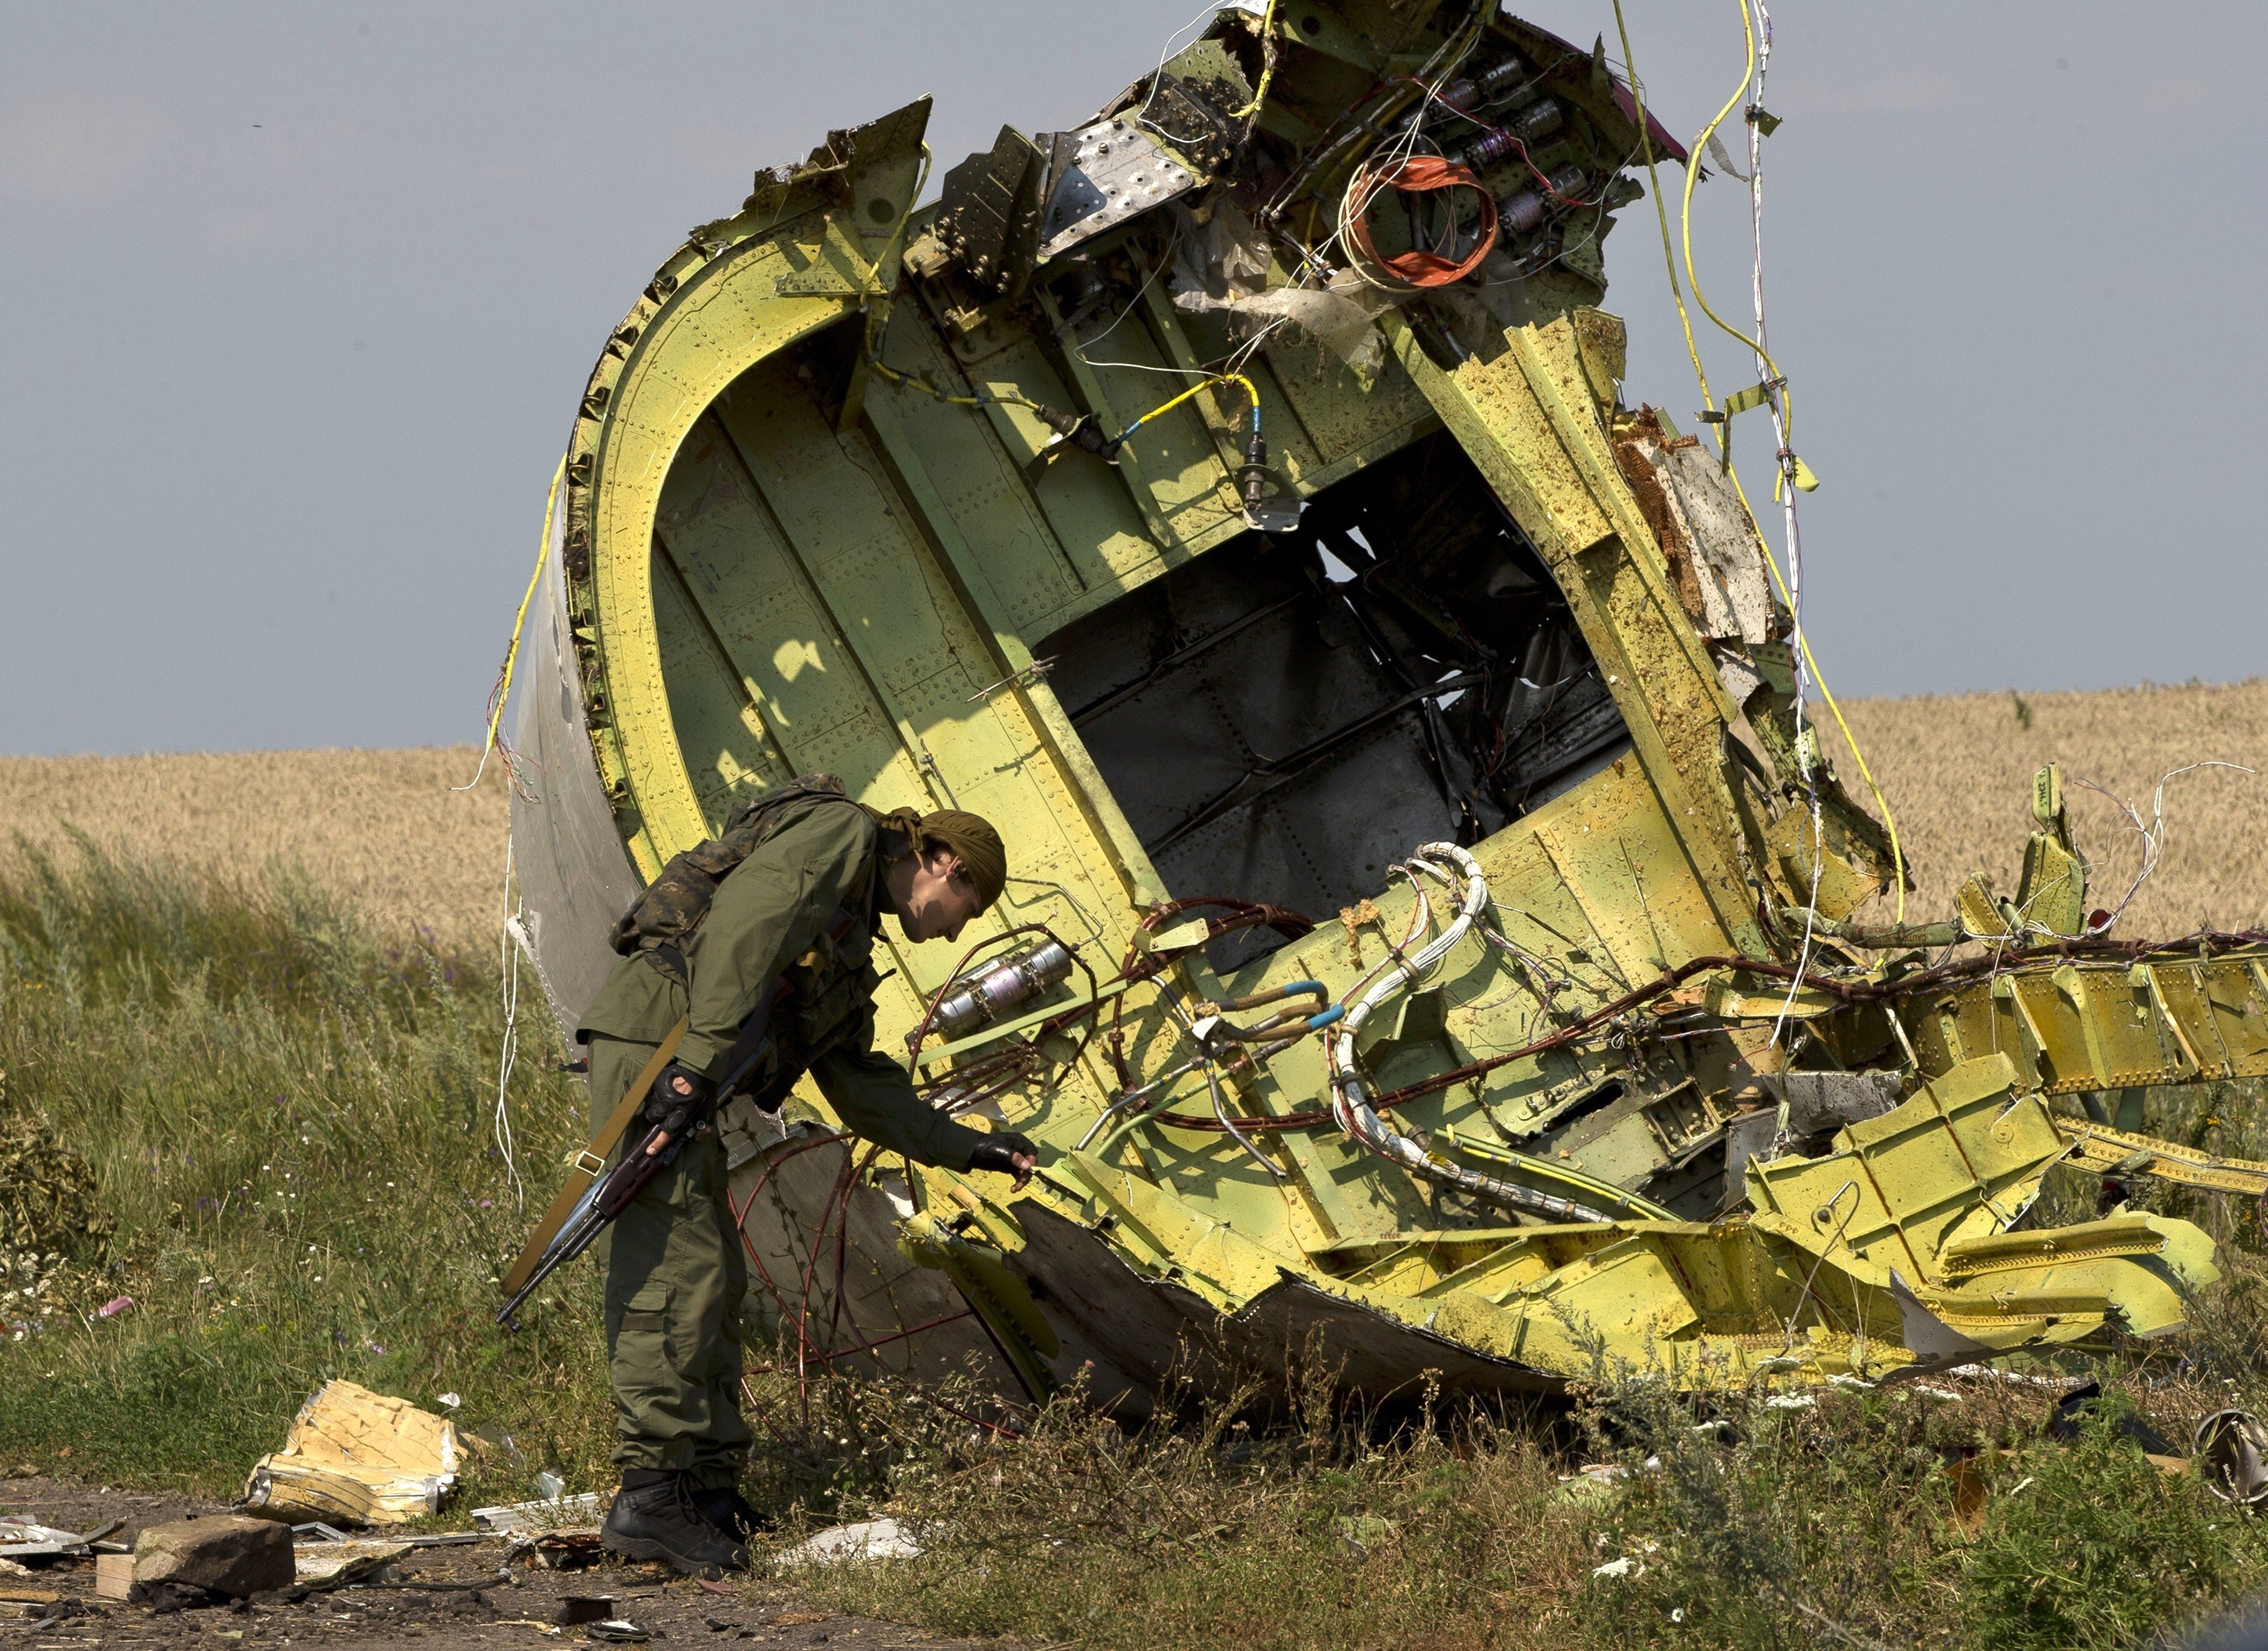 The wreckage of the Malaysia Airlines flight MH17 at the crash site in Hrabove, eastern Ukraine. File photo: AP
